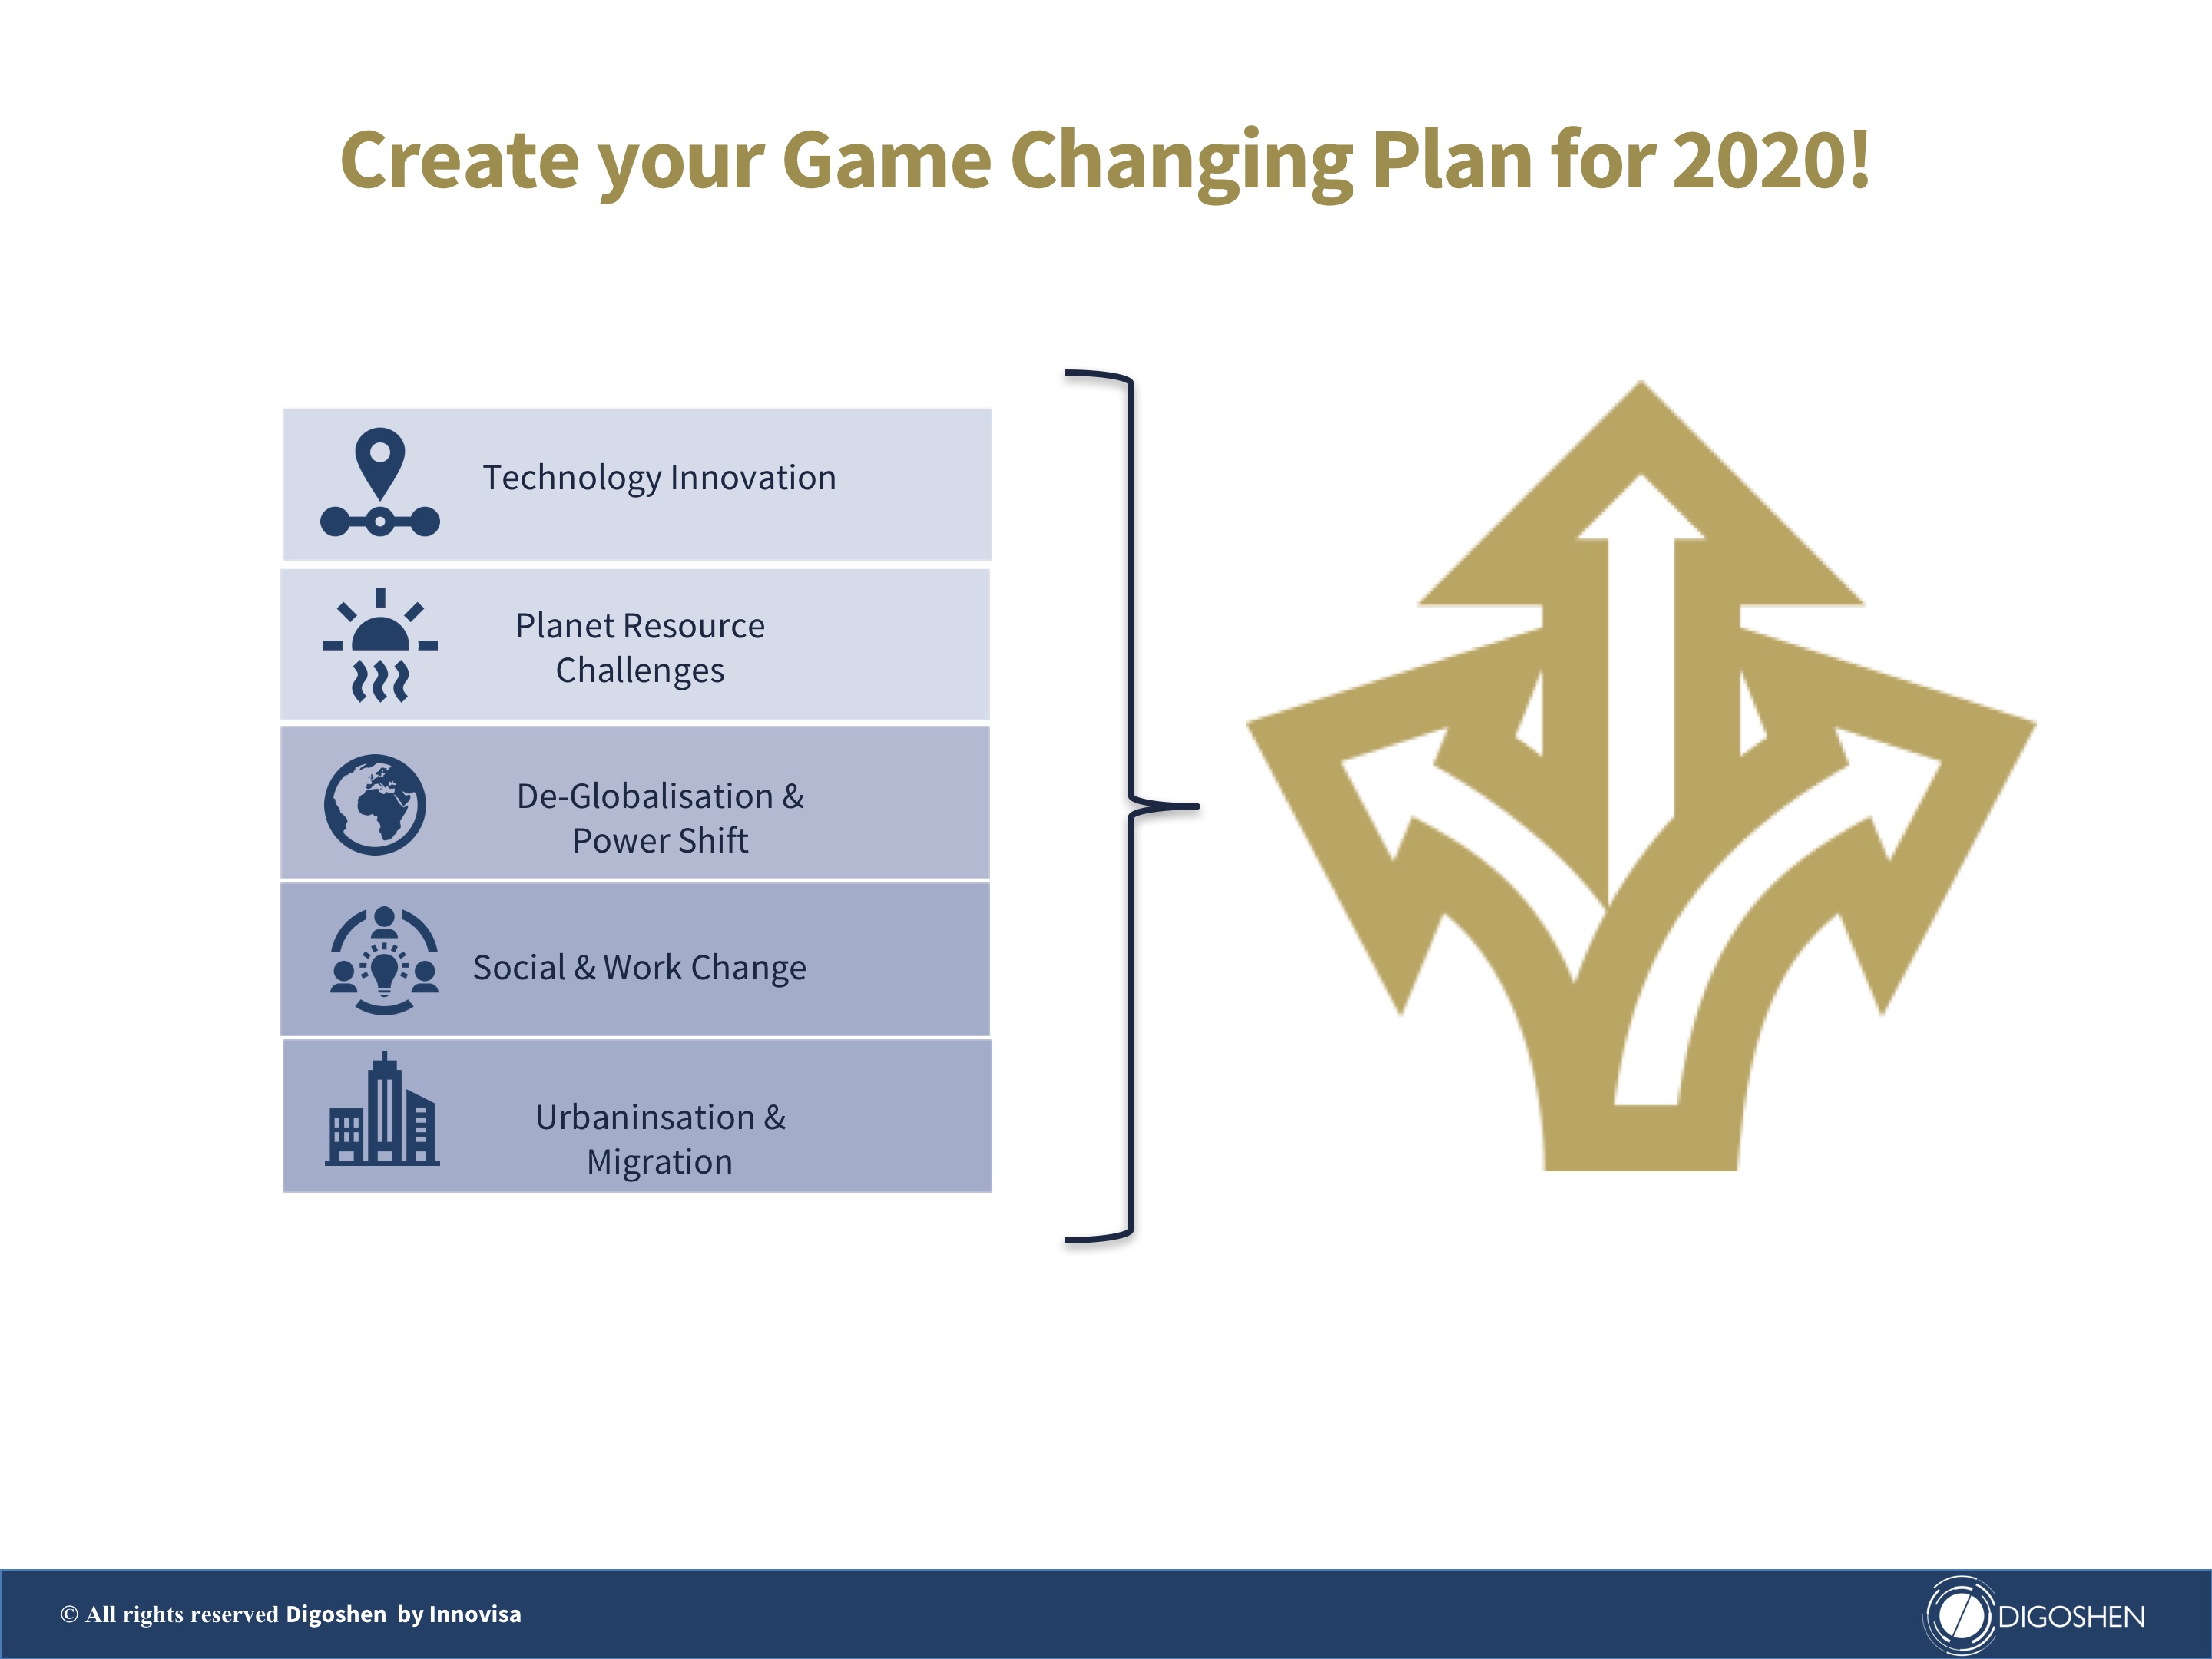 Mega Trends for a Game Changing plan 2020